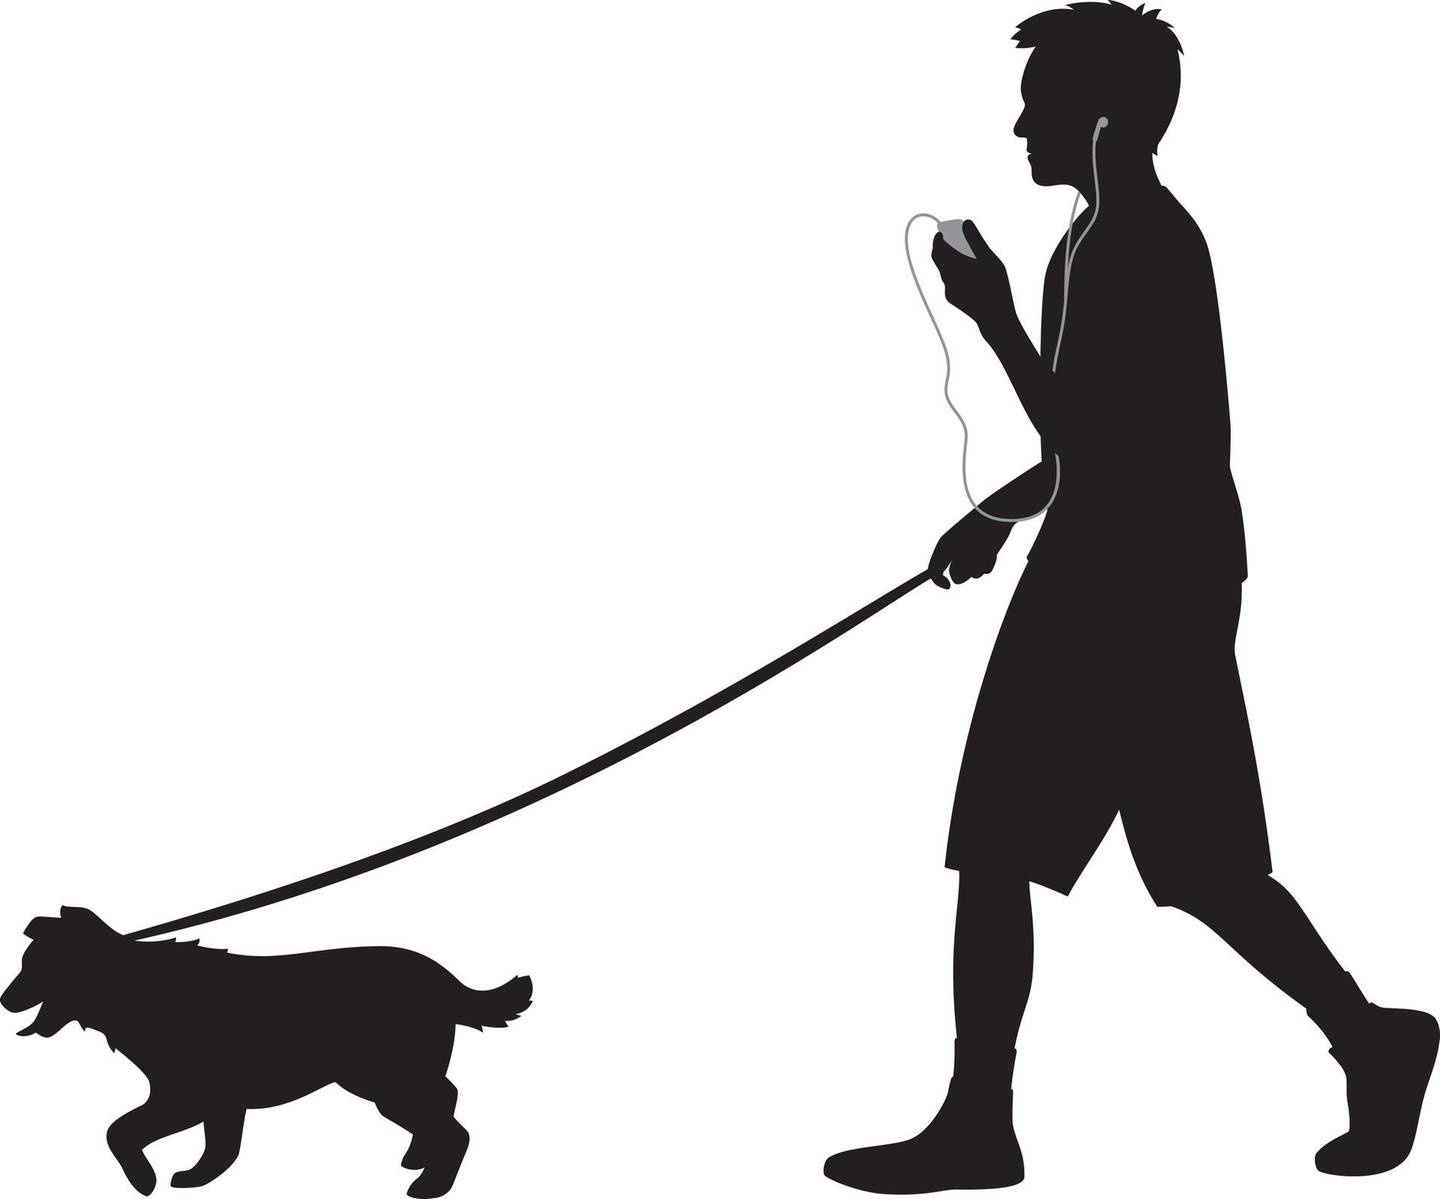 Want a playlist for while you're walking your dog? There are plenty of those, too. Getty Images